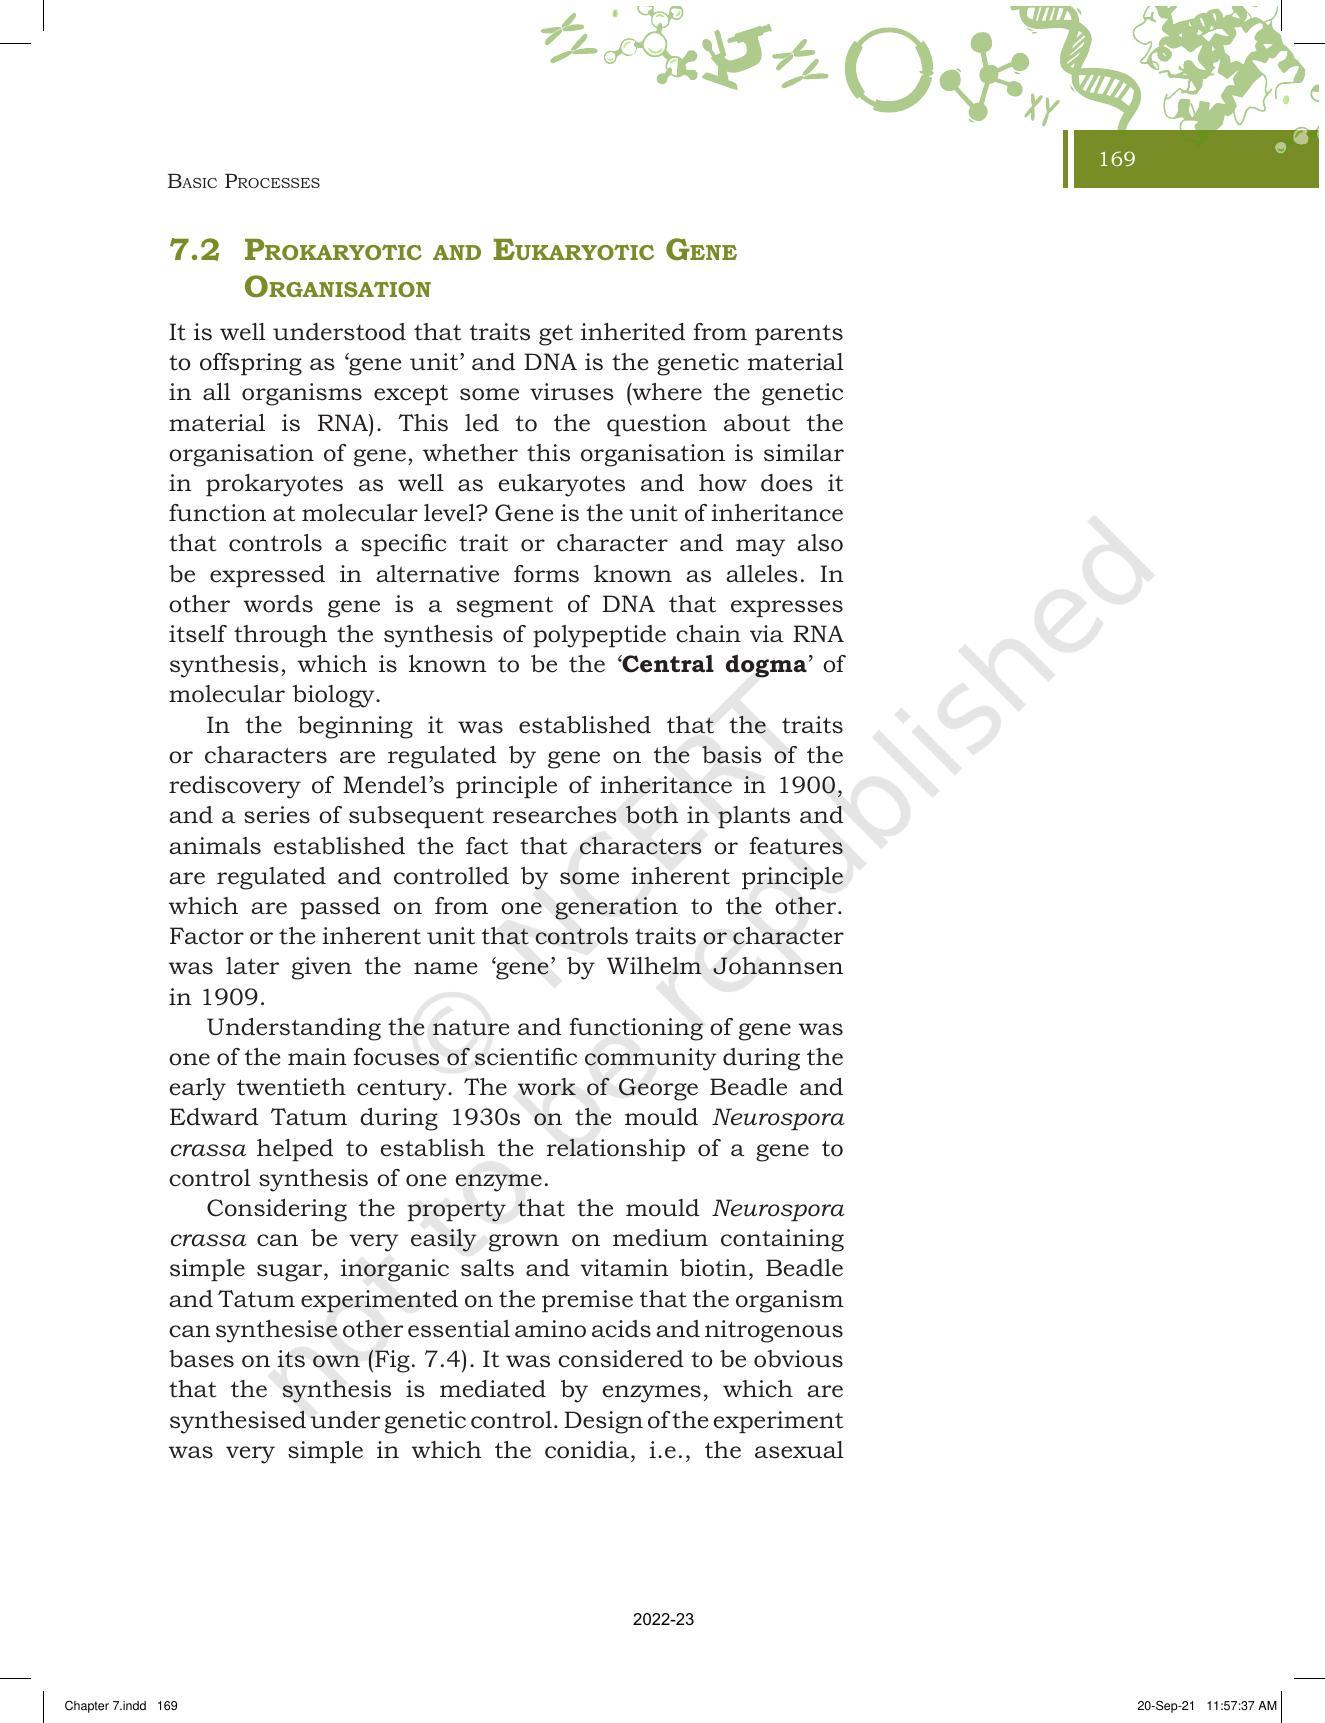 NCERT Book for Class 11 Biotechnology Chapter 7 Basic Processes - Page 6